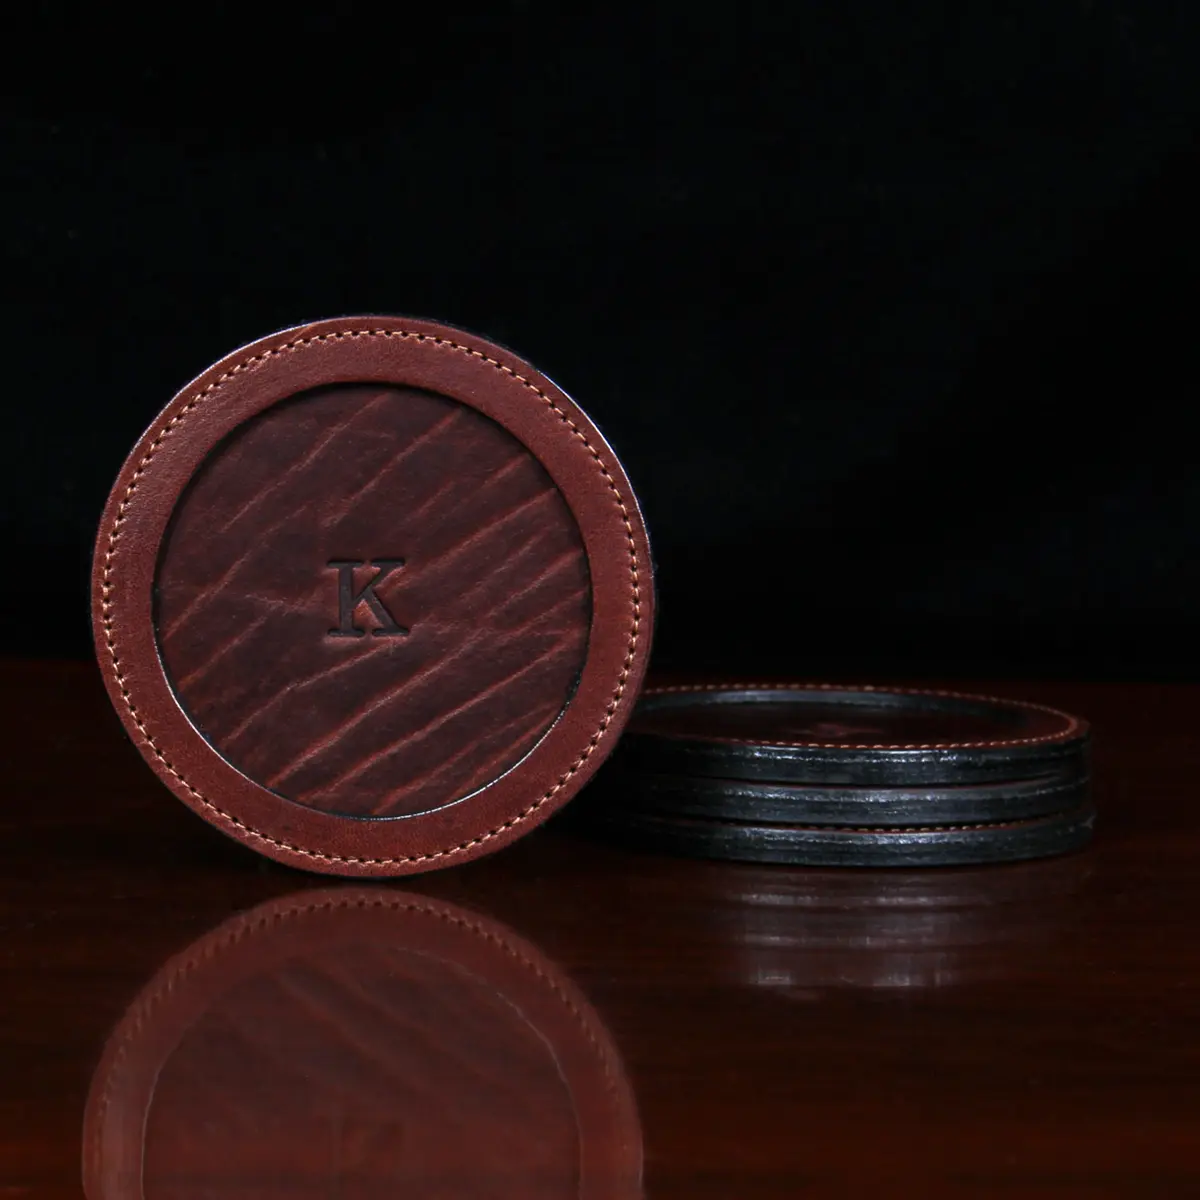 leather coaster with K initial on table sitting next to 3 others stacked next to it